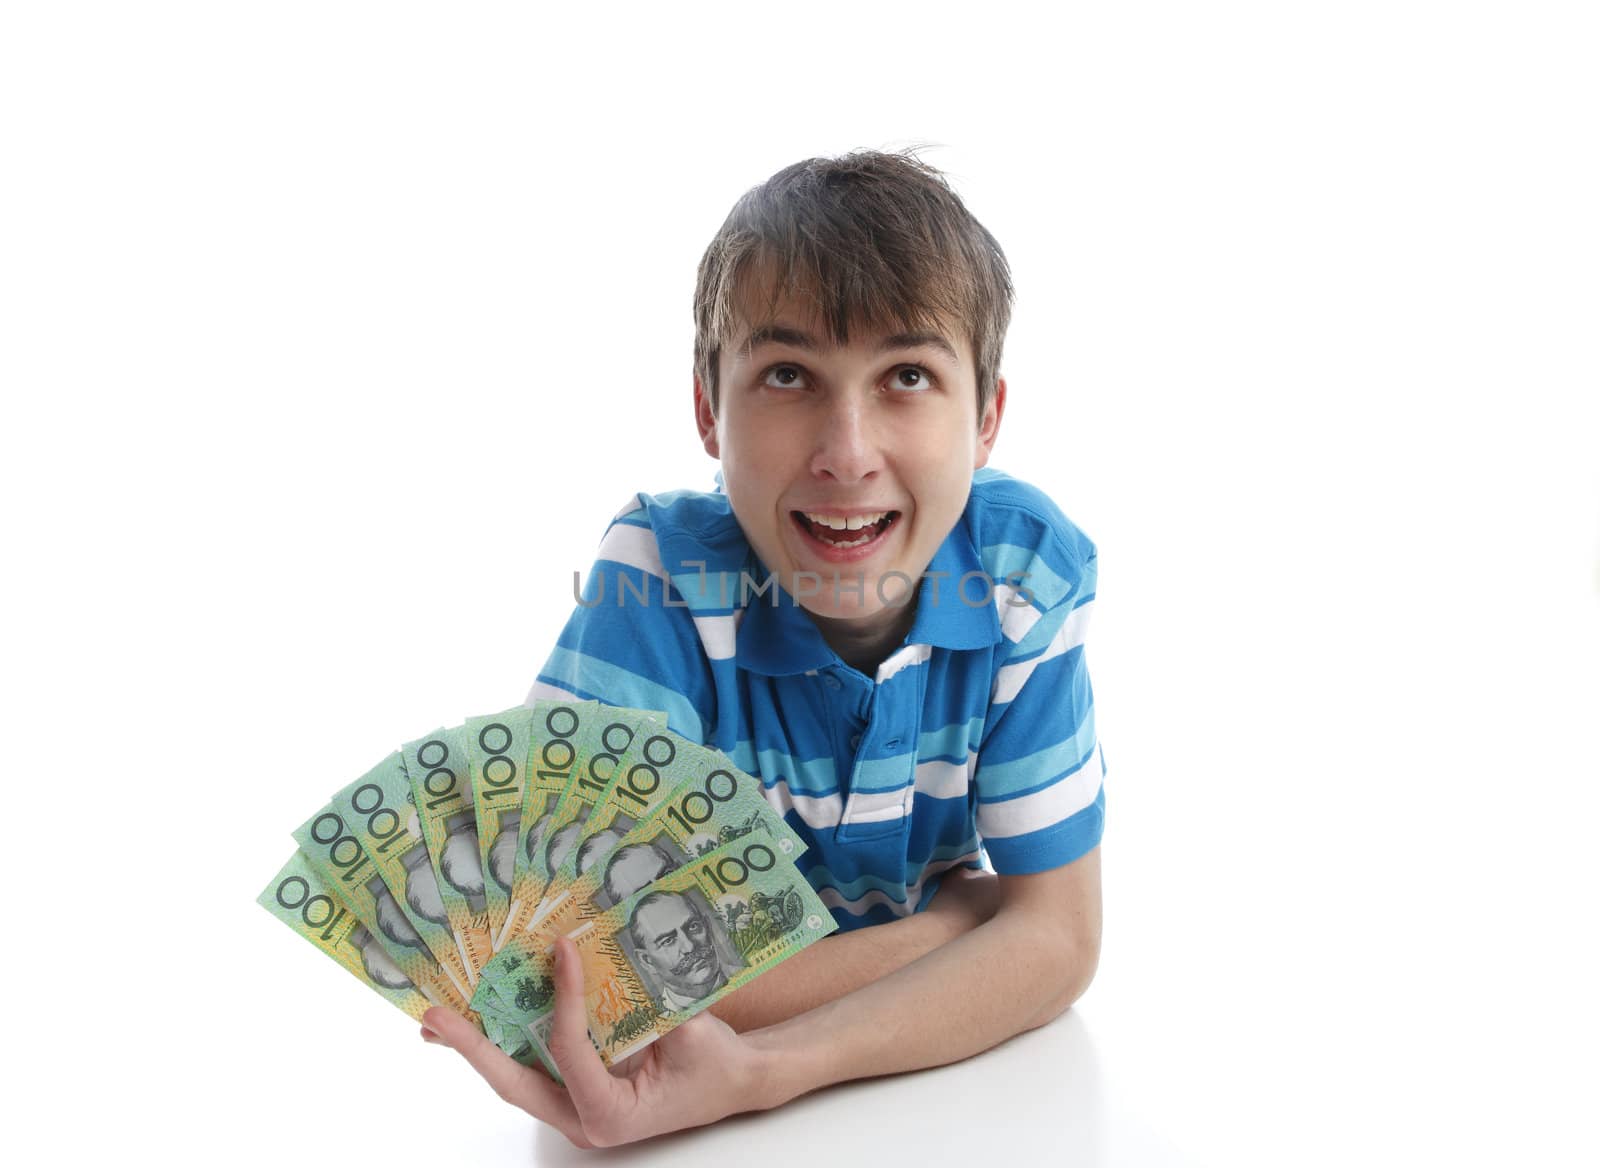 A teen boy holding a fan of money banknotes cash.  eg competition, win, finance, savings, earning, etc